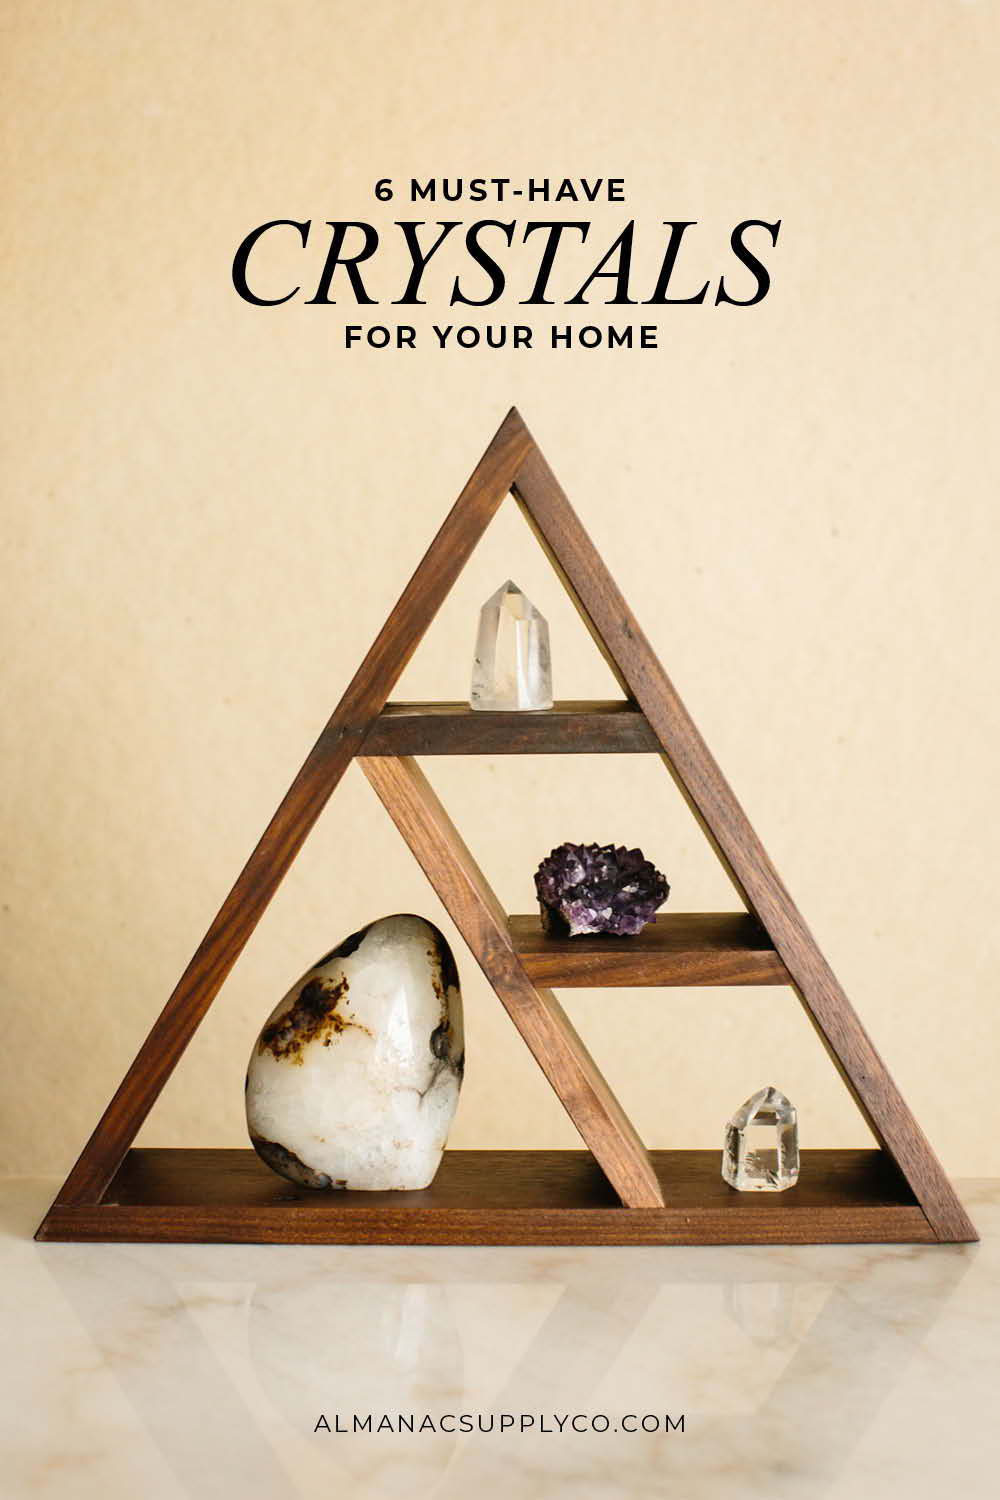 Choosing Crystals for Home